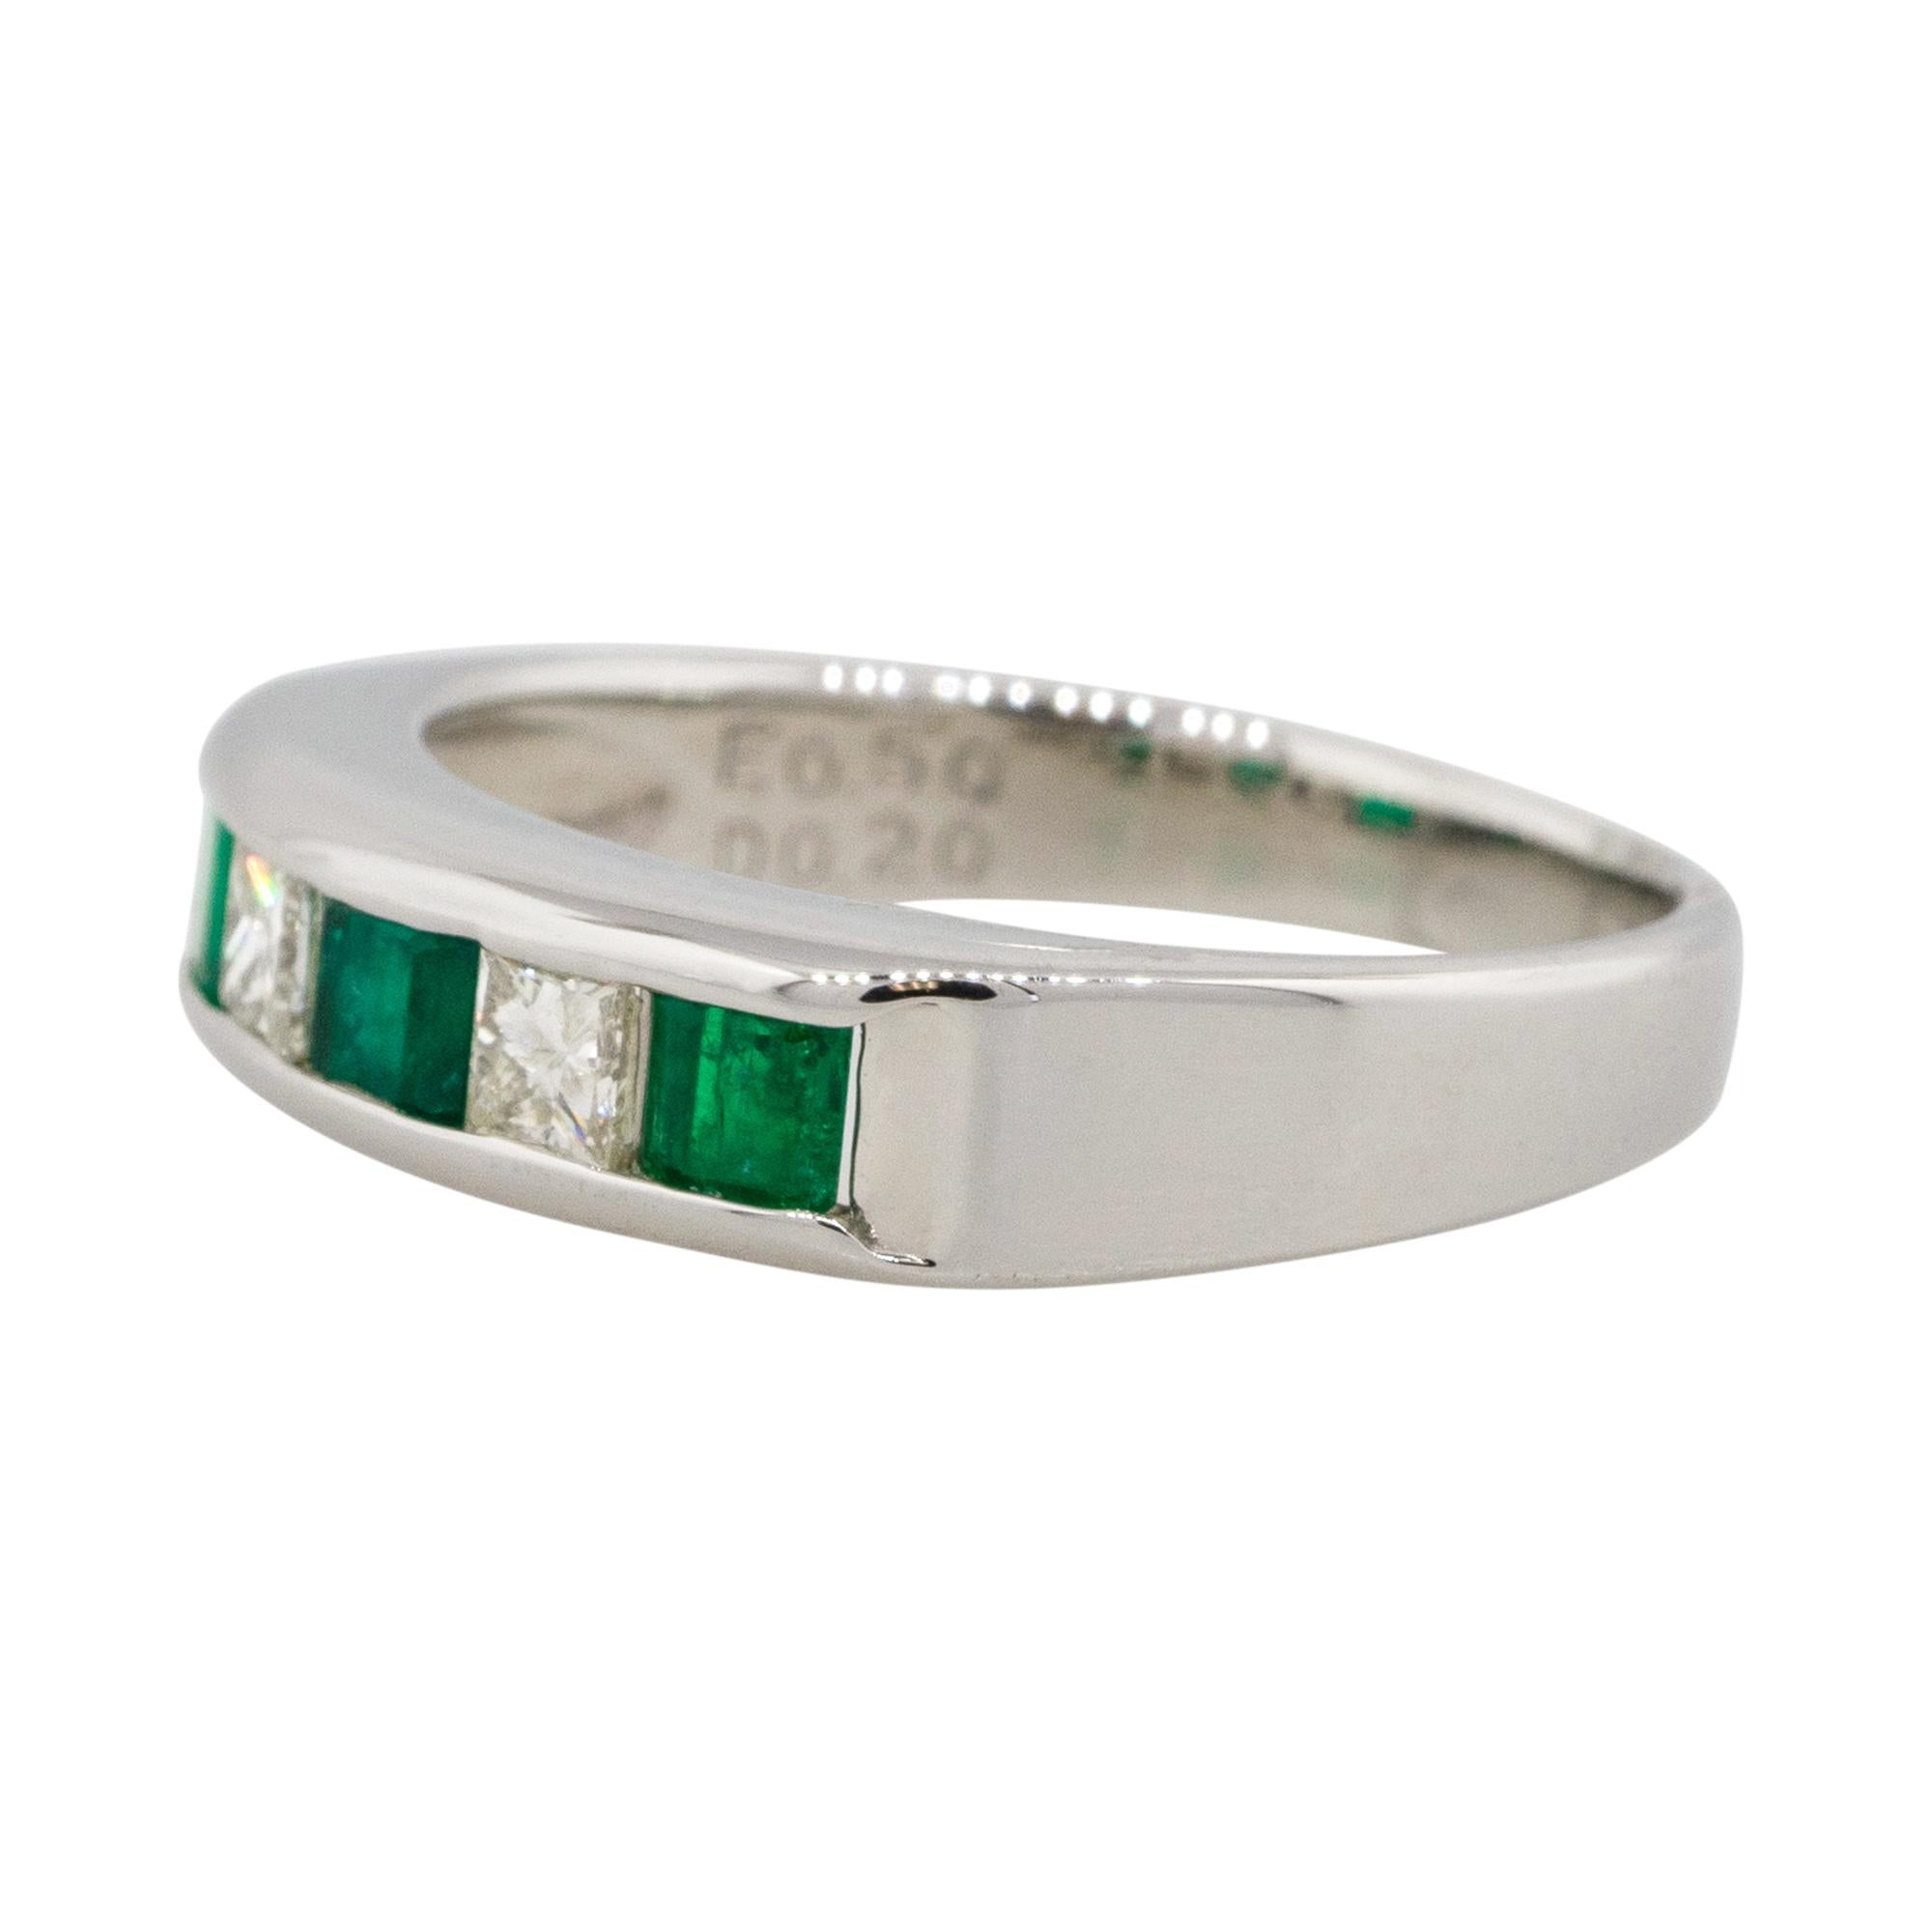 Material: Platinum
Gemstone details: Approx. 0.50ctw fo Emerald gemstones
Diamond details: Approx. 0.20ctw of princess cut Diamonds. Diamonds are G/H in color and VS in clarity
Ring Size: 5.75 
Ring Measurements: 0.75